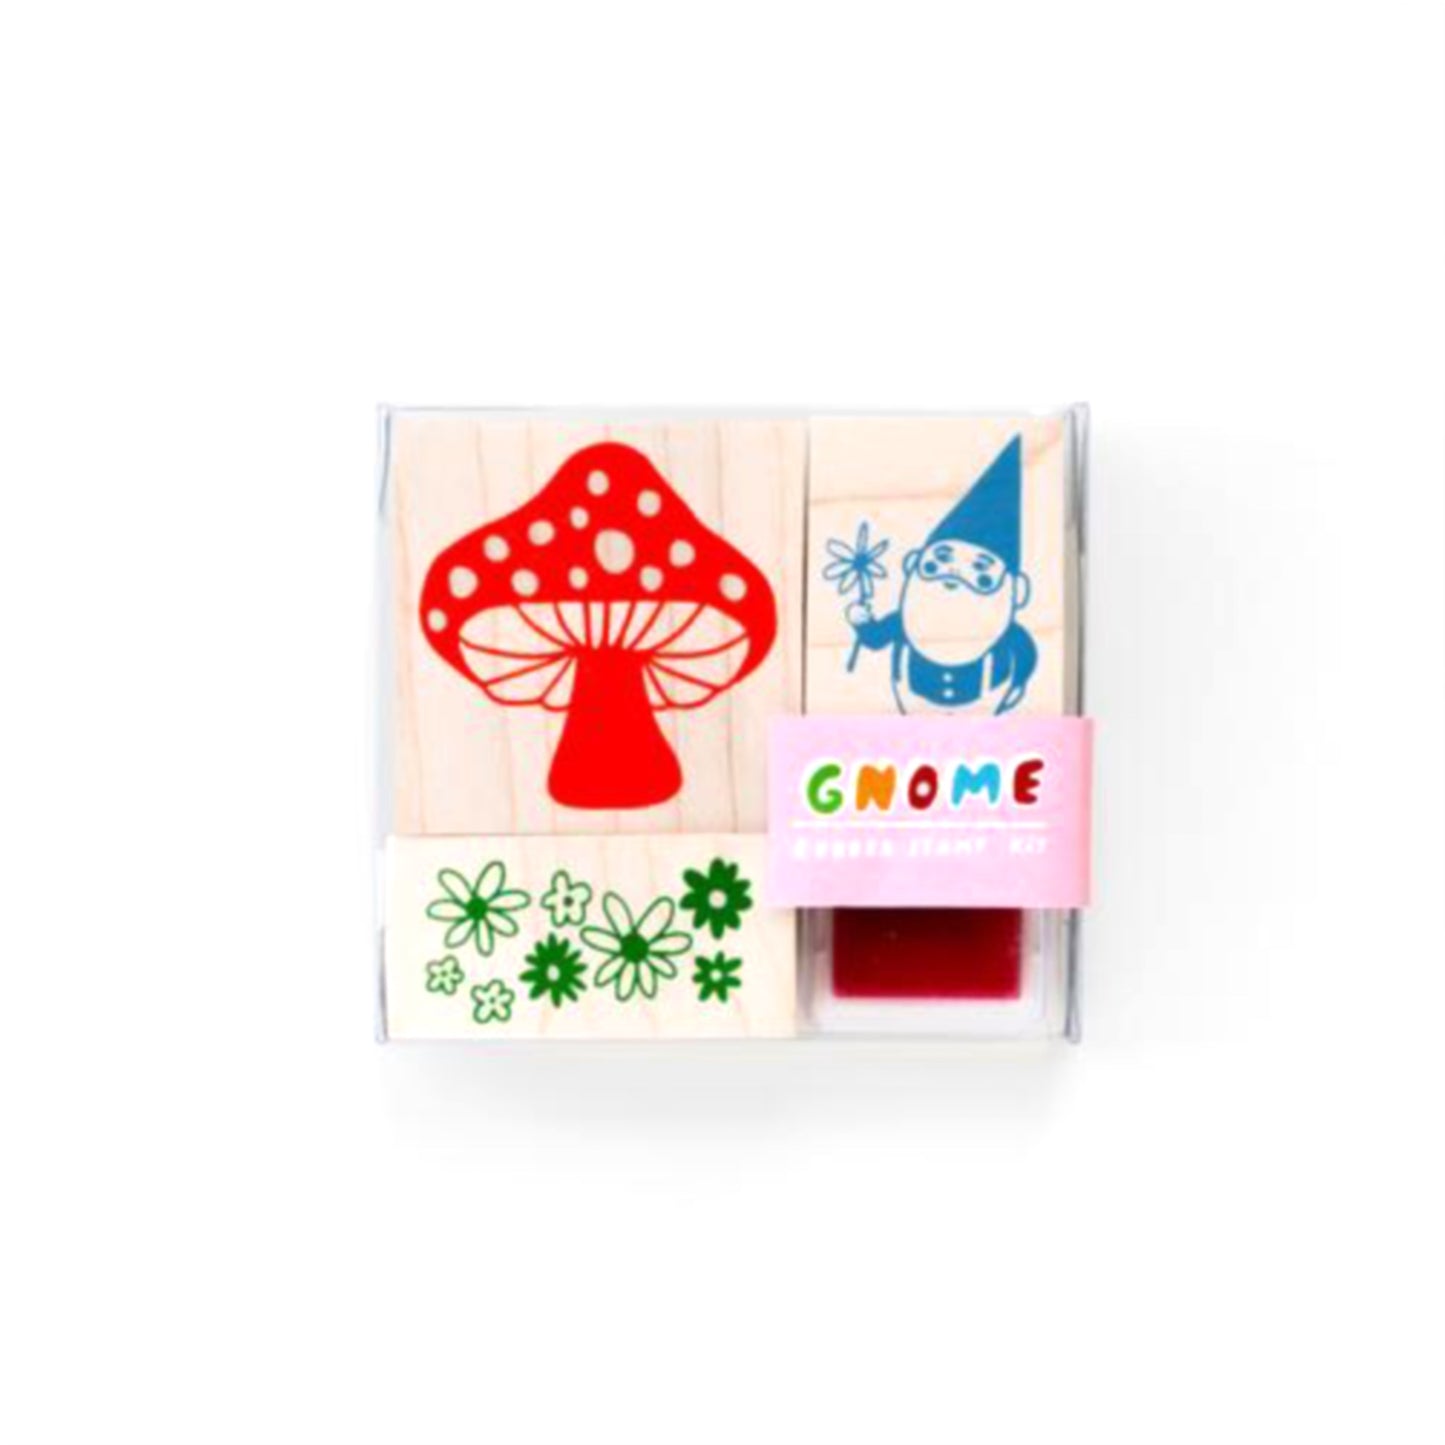 Gnome and Mushroom Stamp Kit by Yellow Owl Workshop - by Yellow Owl Workshop - K. A. Artist Shop